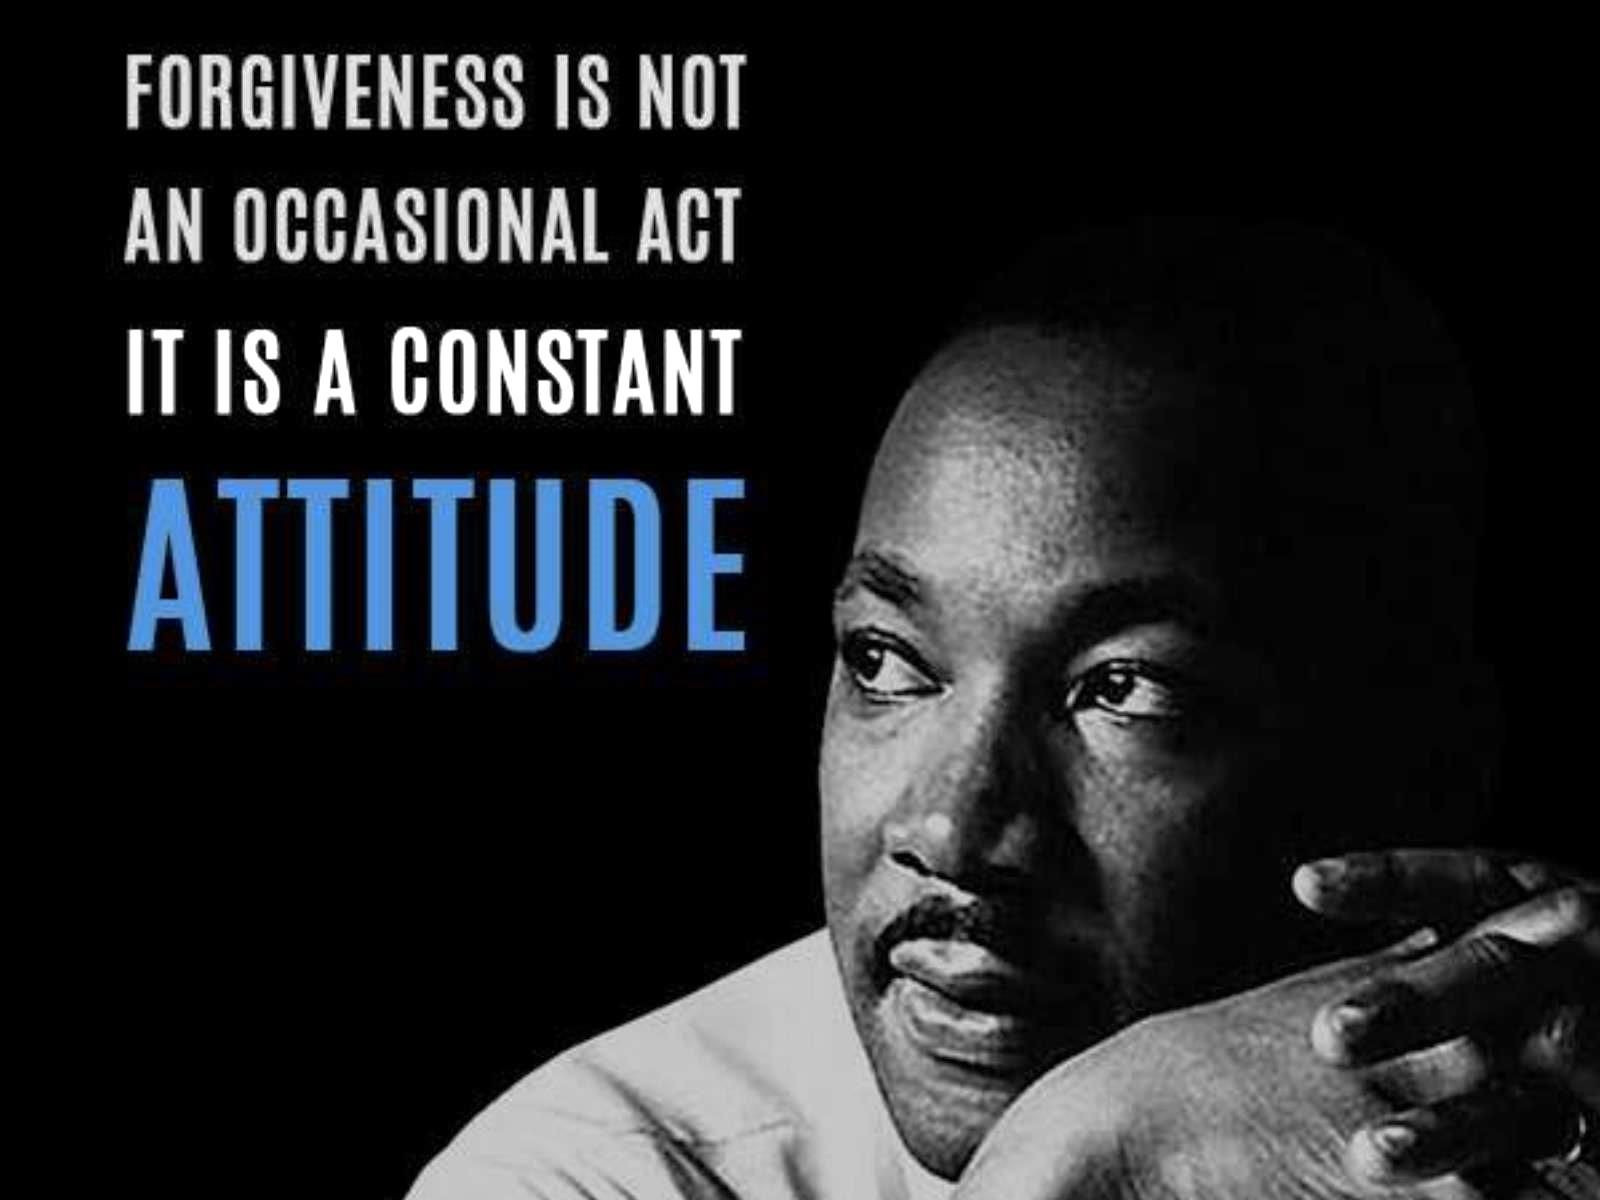 Mlk Quote Education
 mlk quote education Google Search